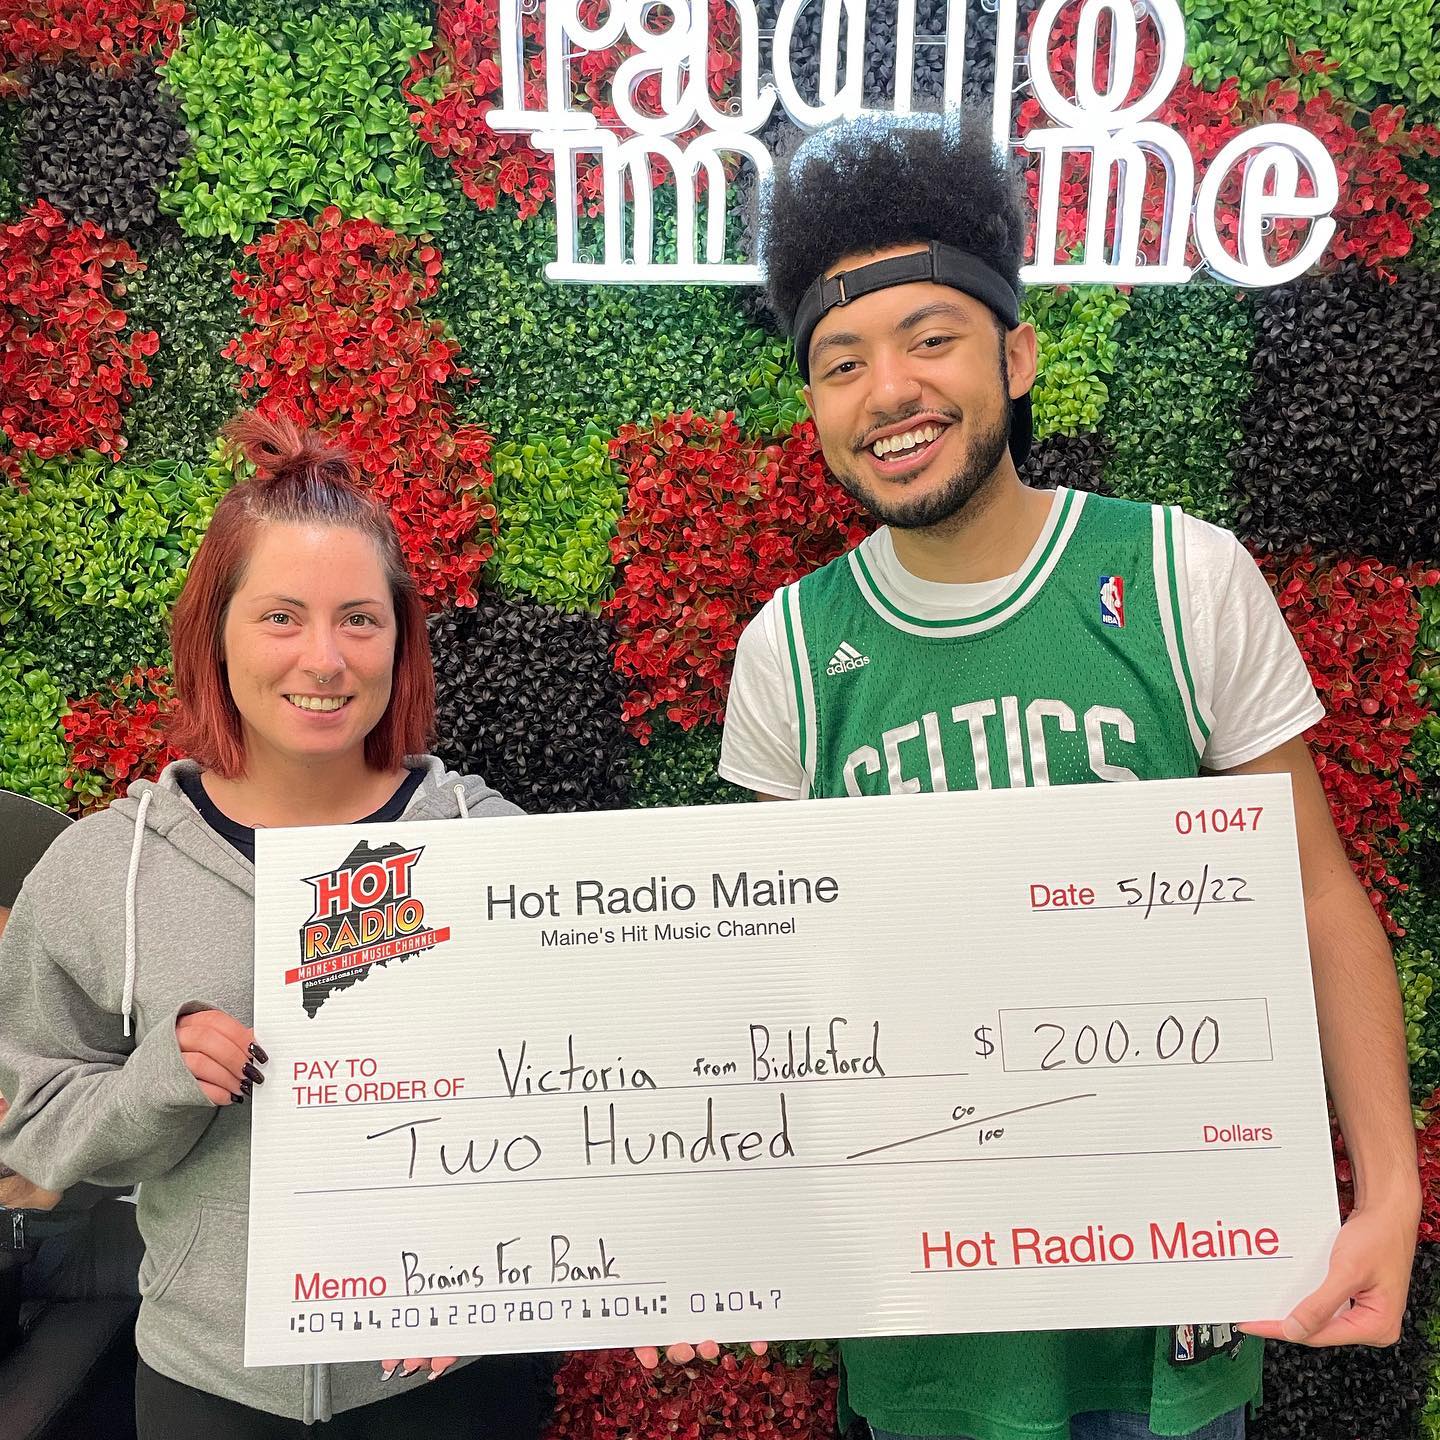 Shout out to Victoria from Biddeford- Another #BrainsForBank winner!! Listen weekdays 8am and 5pm for your chance to play!! ðŸ§ 4ï¸âƒ£ðŸ¦ made Hot in Maine by @leeautomalls #MaineMade #MaineWinners